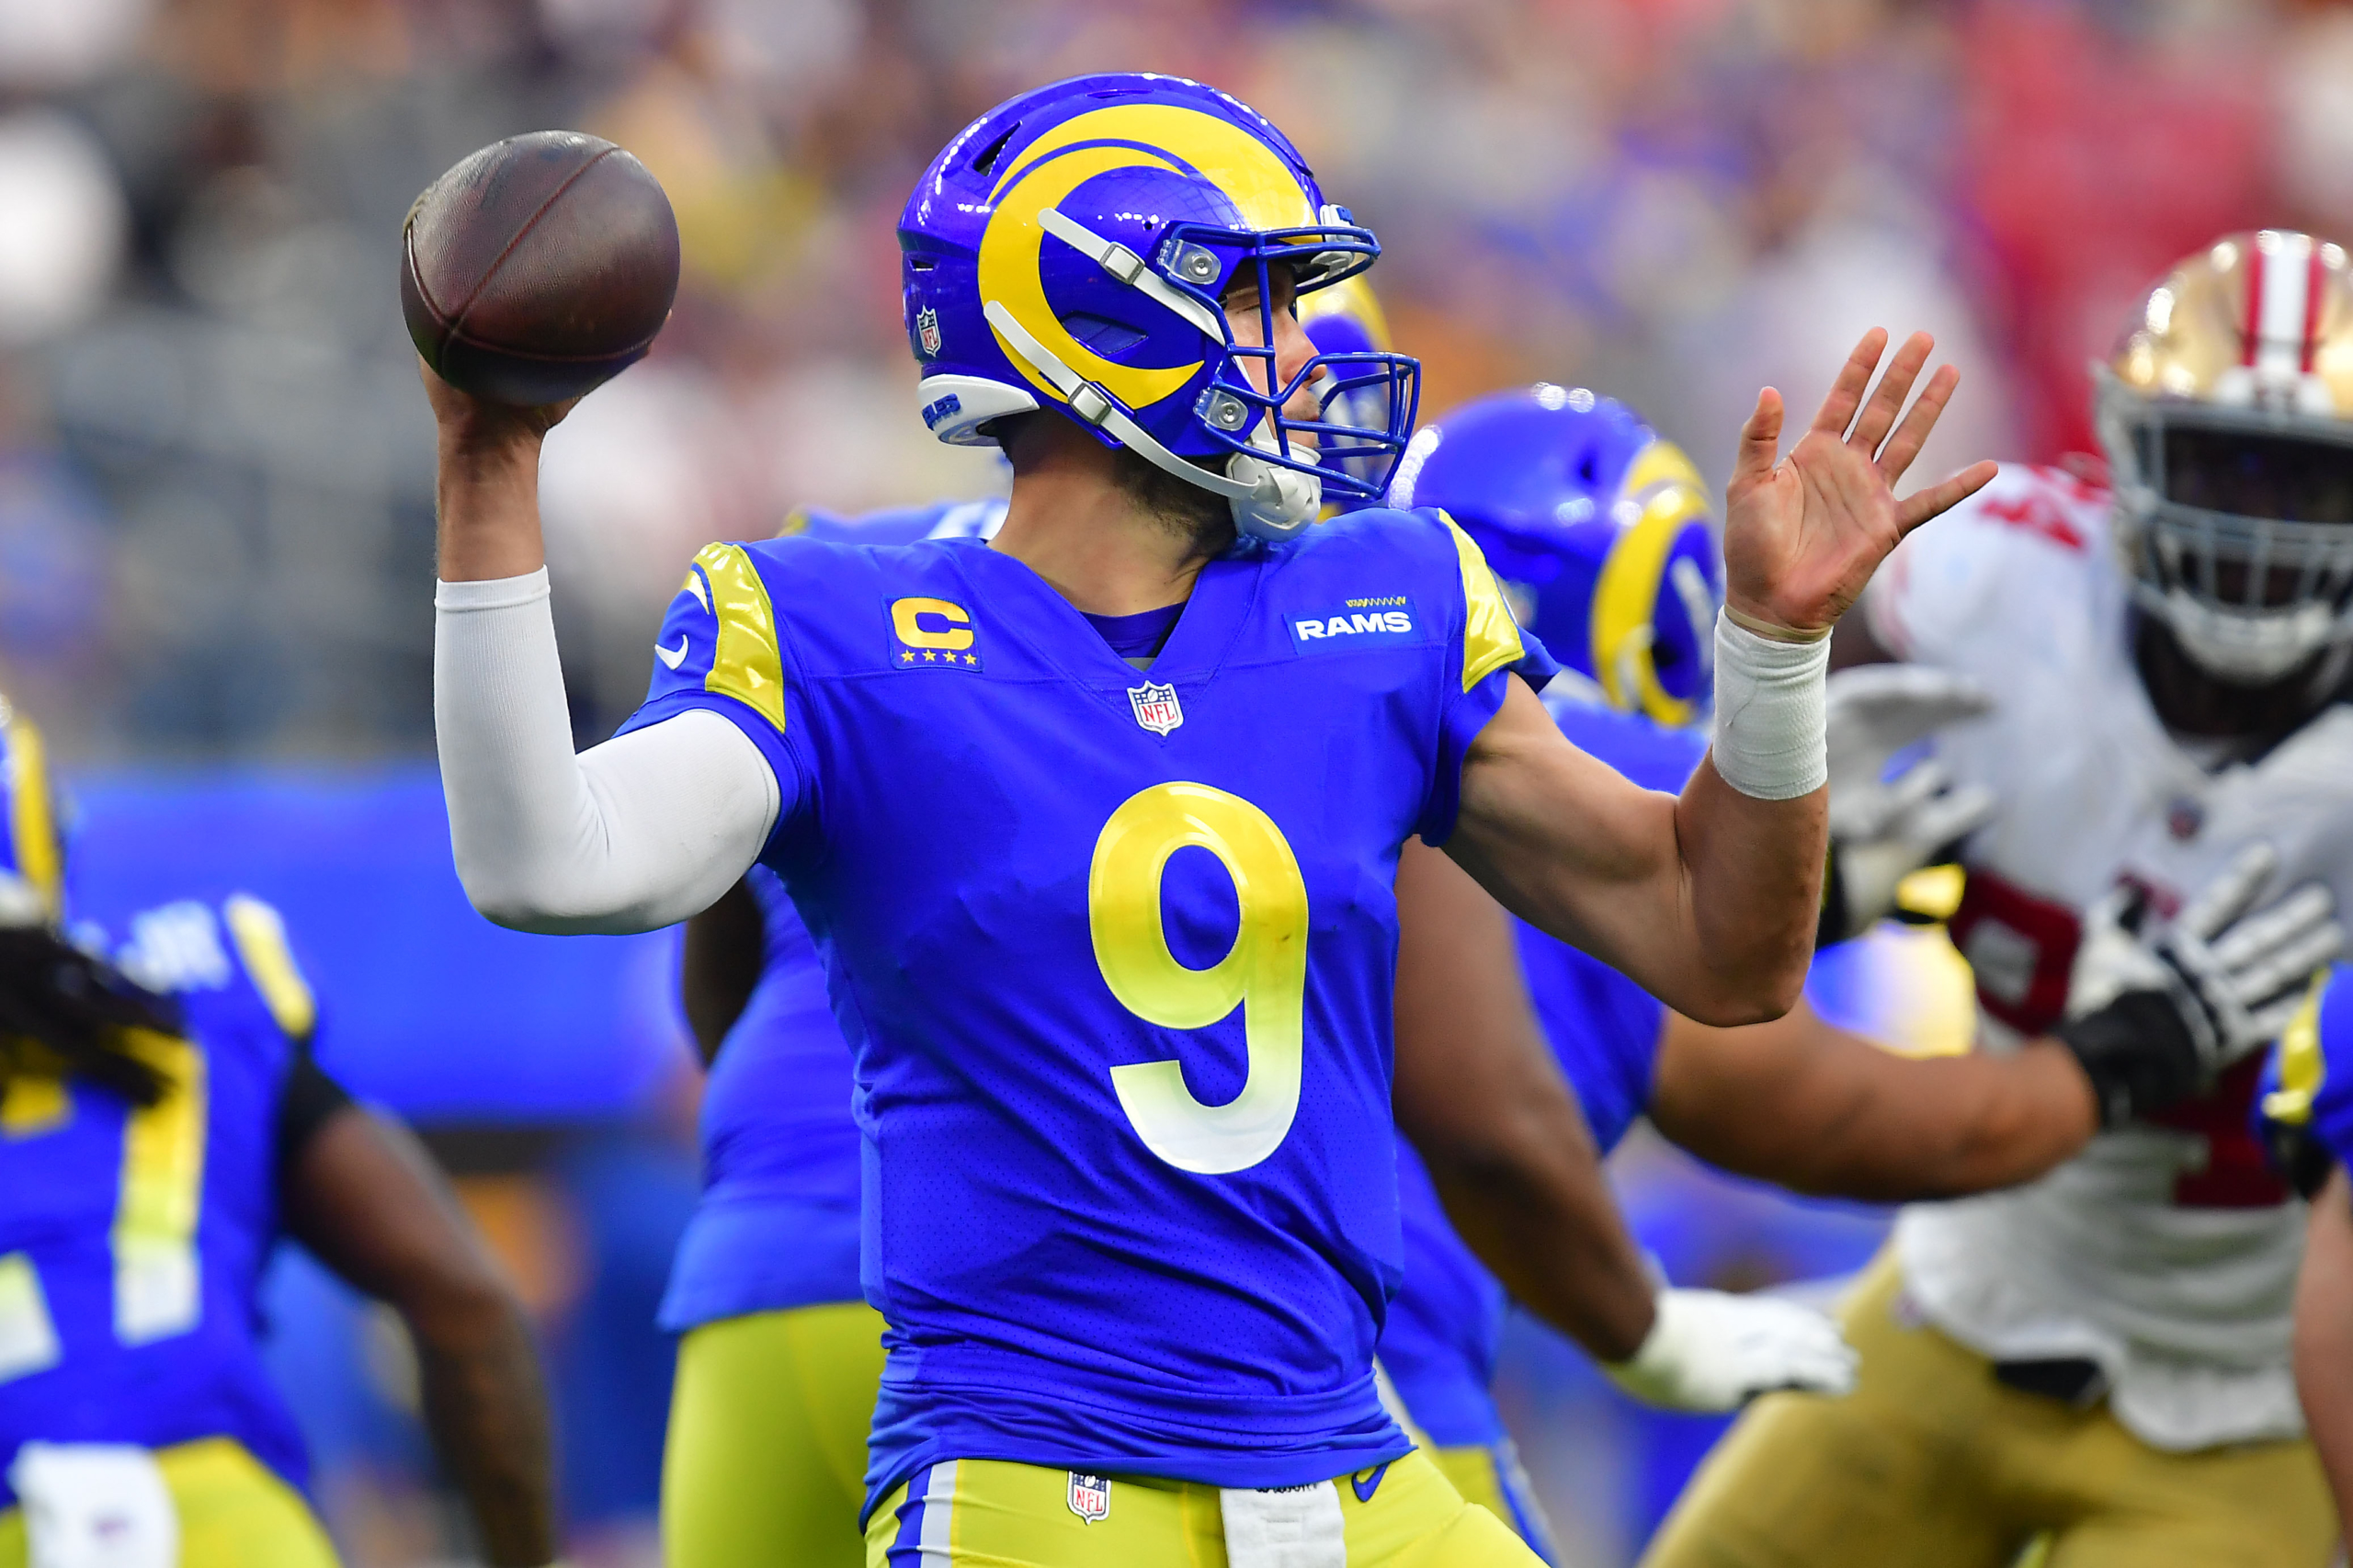 Los Angeles Rams schedule: Baker Mayfield looks to improve his value vs Seahawks